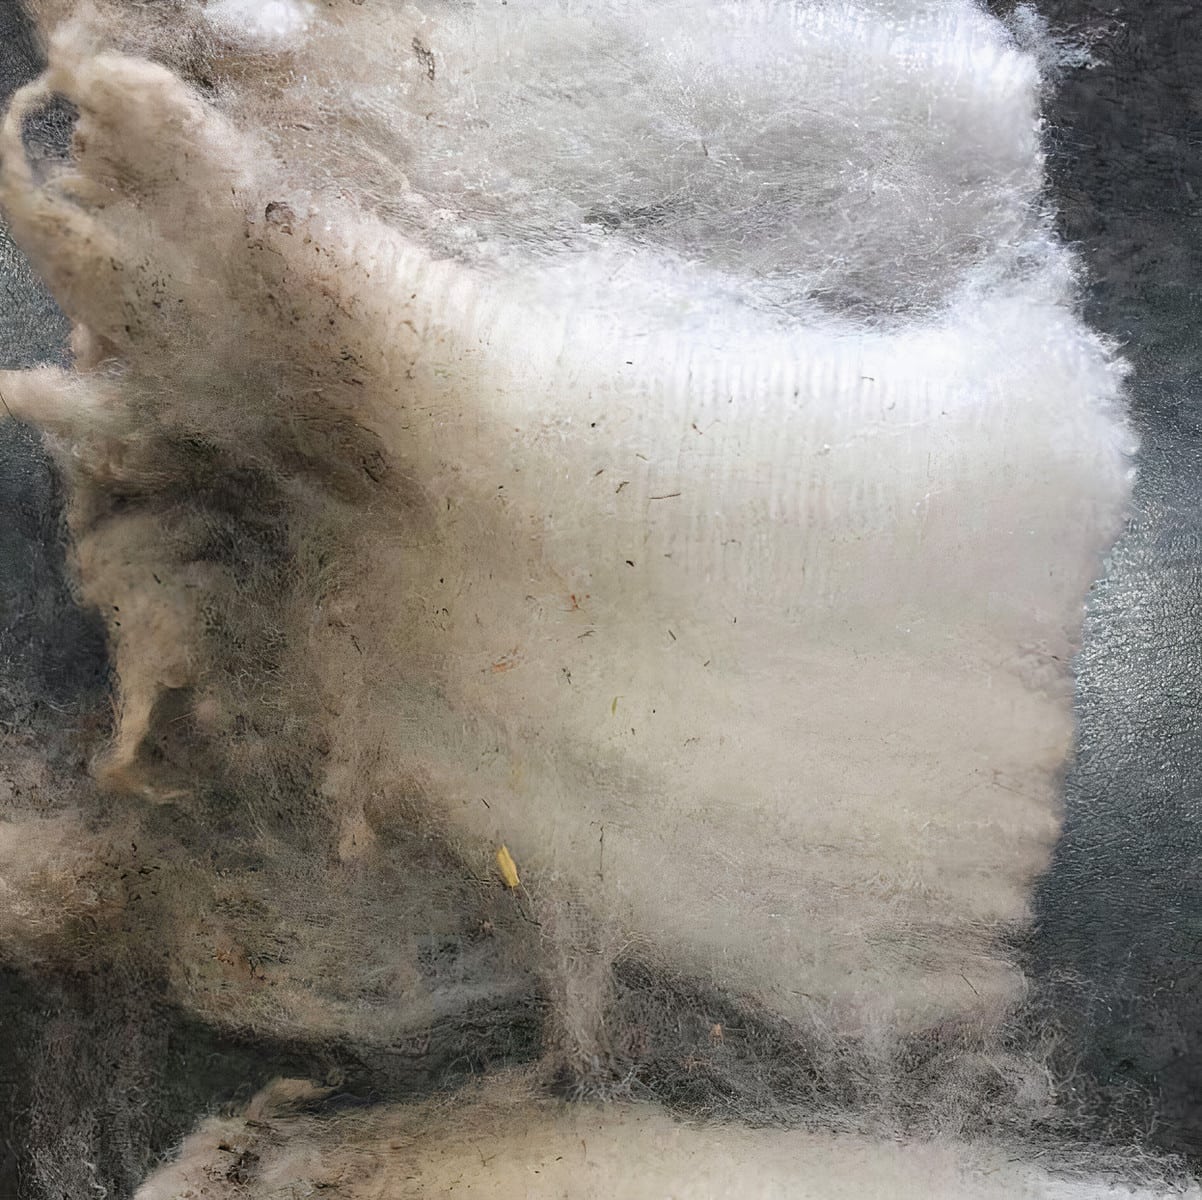 image description: a close-up of wool fibre, after it's been sheared from the sheep